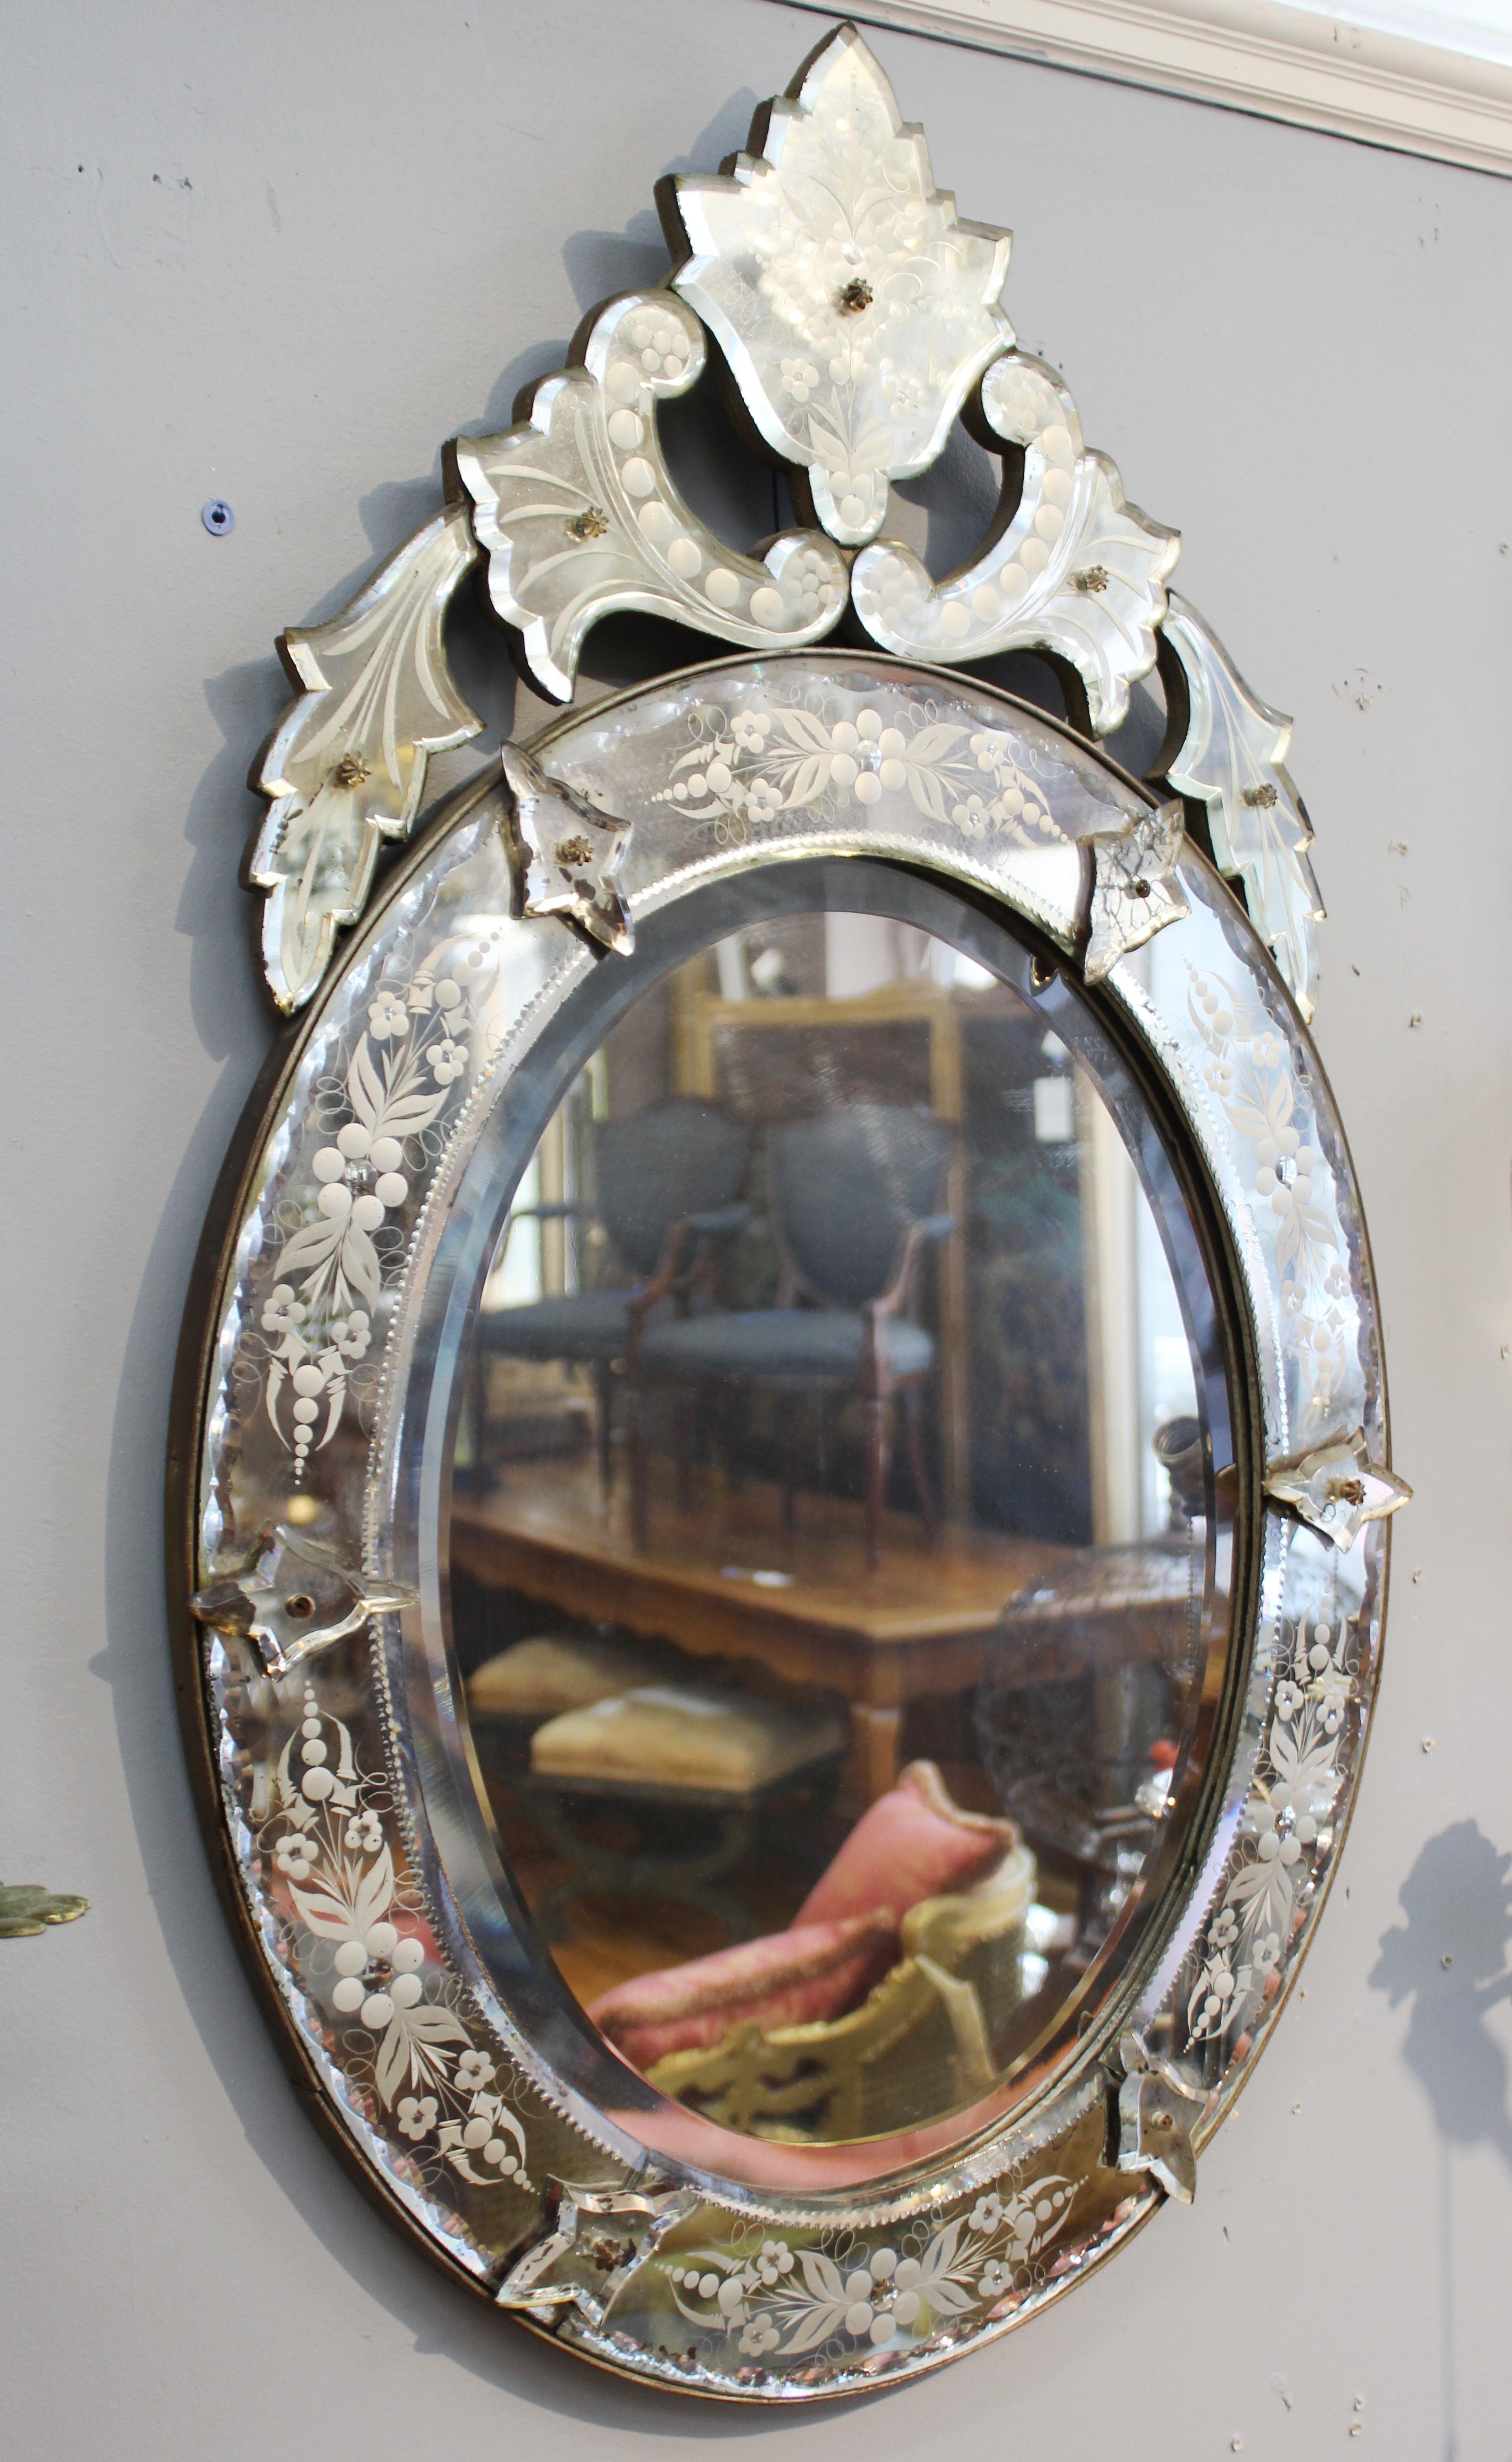 Hollywood Regency Venetian oval shaped wall mirror with beveled and scalloped elements and etched floral decor. The piece is in great vintage condition with age-appropriate wear to the mirror surfaces.